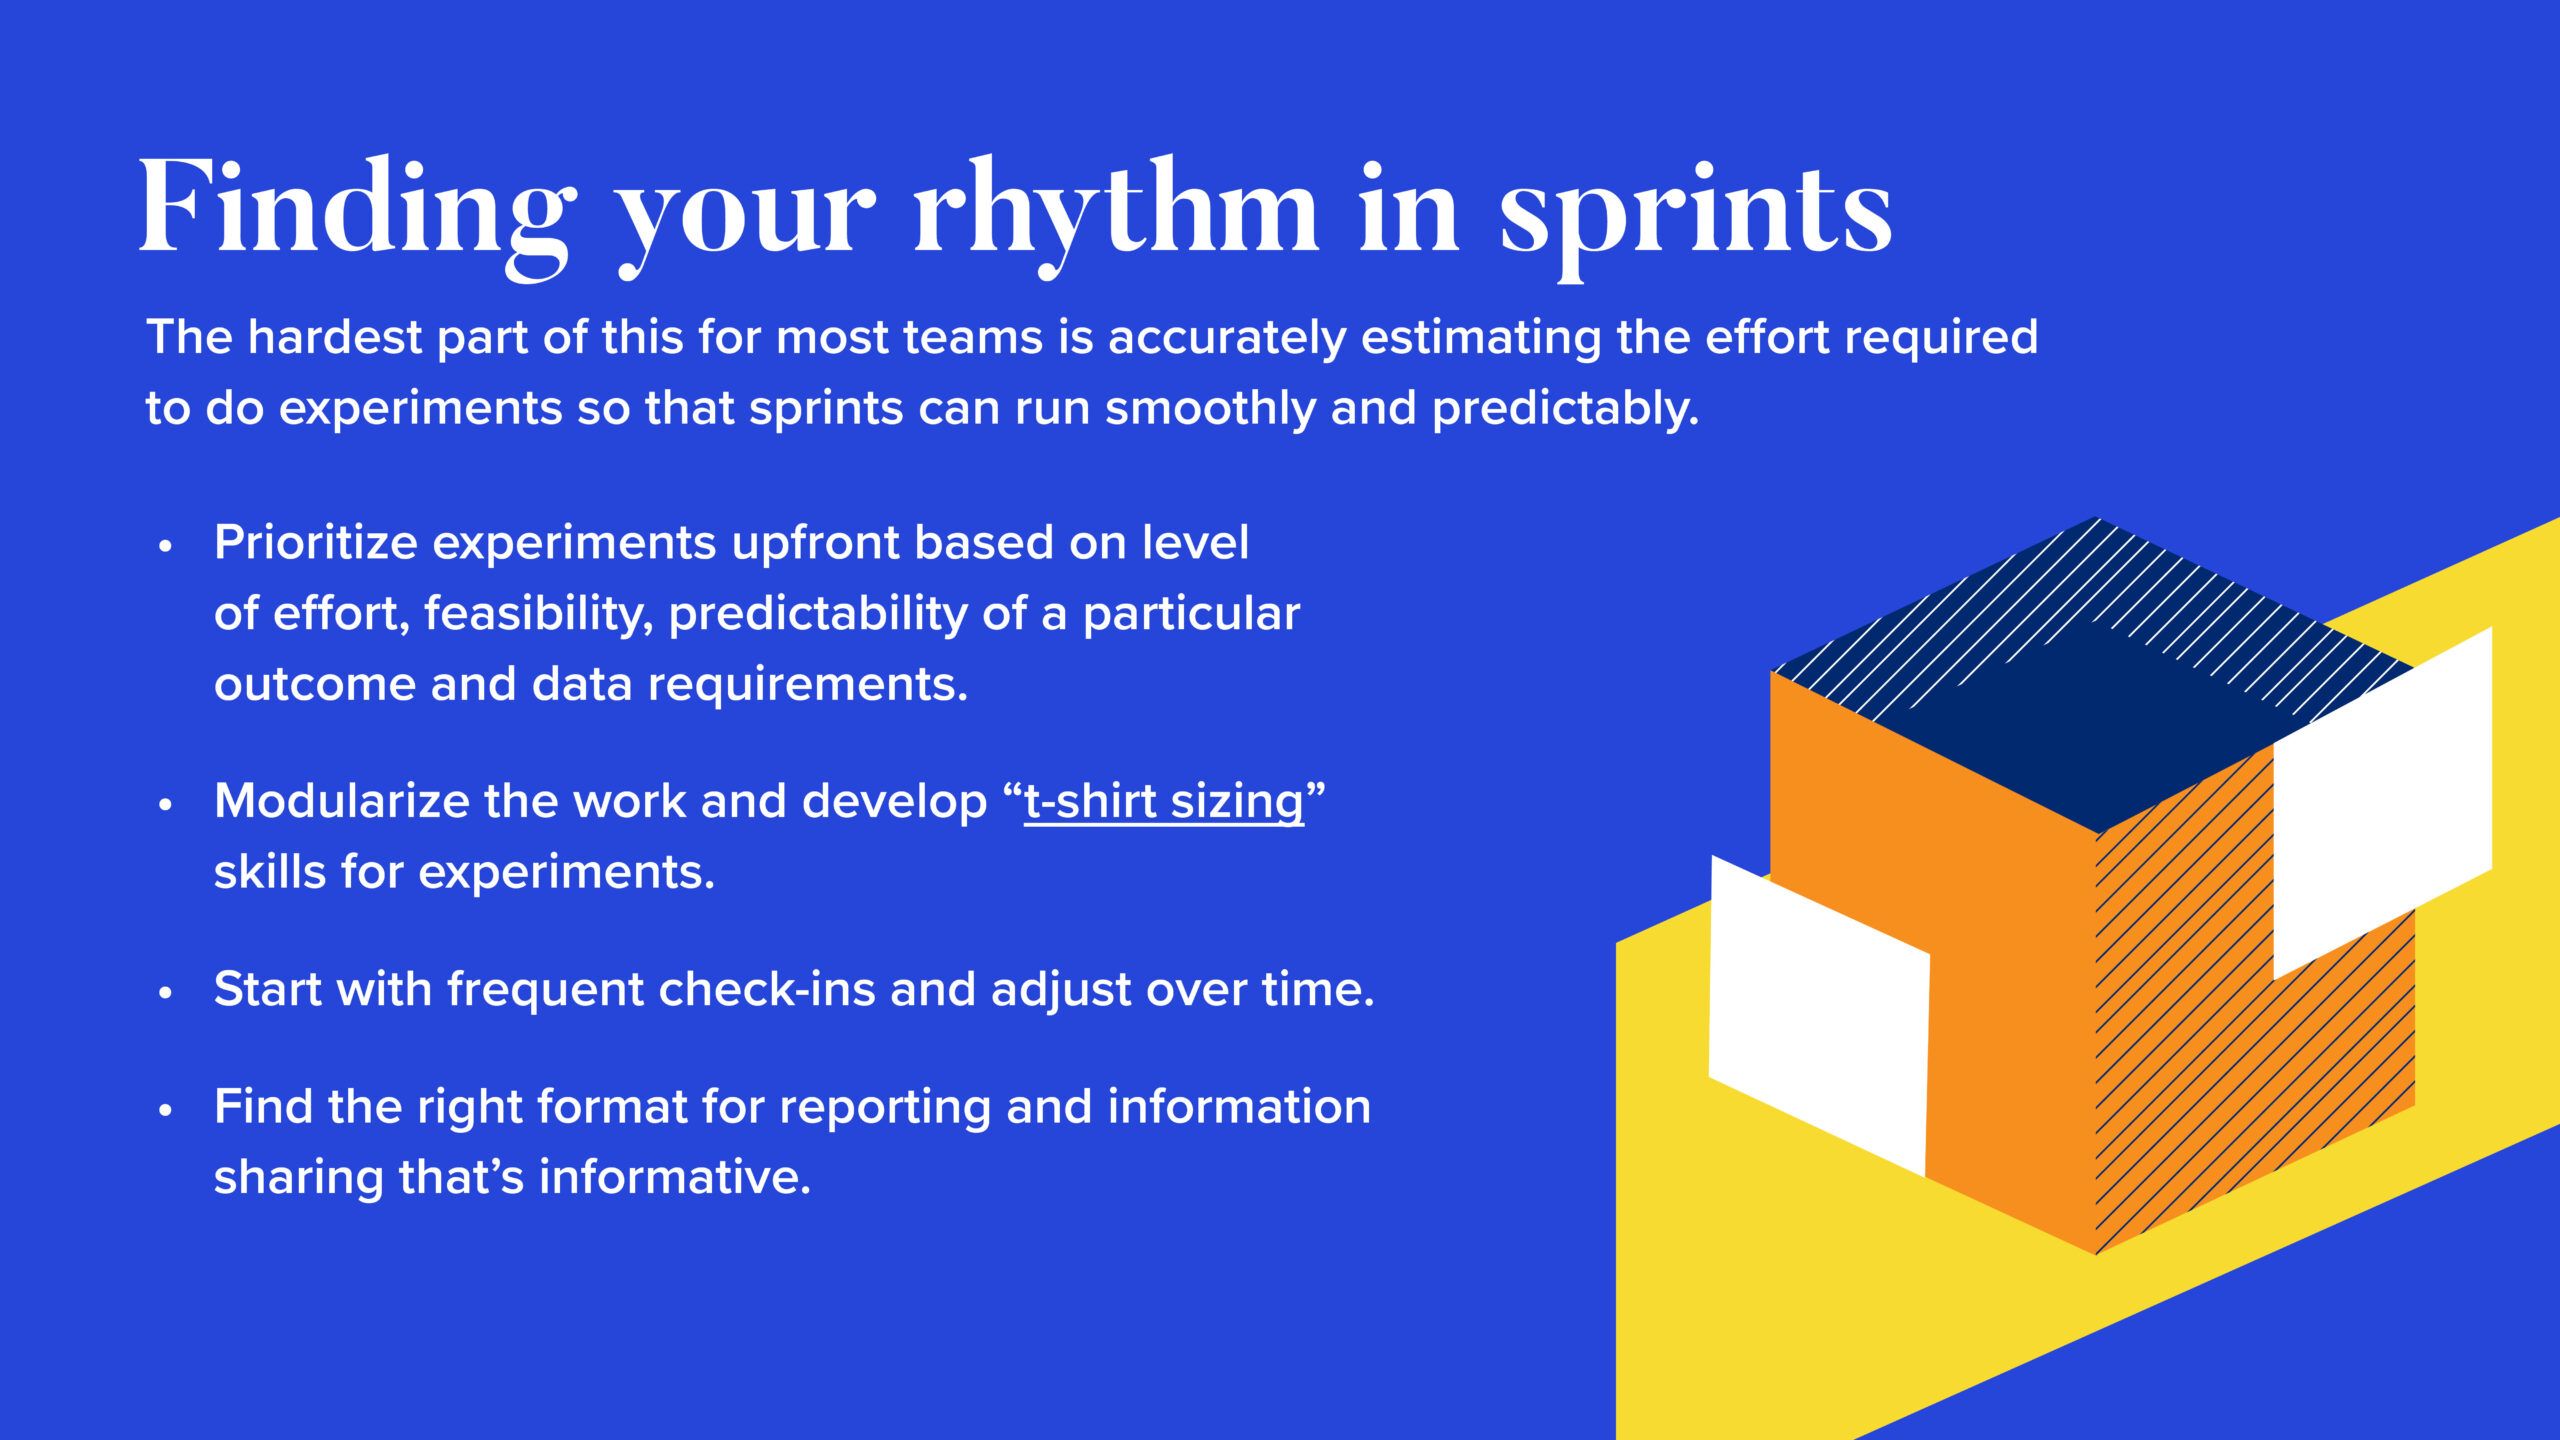 INFOGRAPHIC #3: Finding your rhythm in sprints  The hardest part of this for most teams is accurately estimating the effort required to do experiments so that sprints can run smoothly and predictably.  Prioritize experiments up front based on level of effort, feasibility, predictability of a particular outcome and data requirements. 
Modularize the work and develop “t-shirt sizing” skills for experiments.
Start with frequent check-ins and adjust over time.
Find the right format for reporting and information sharing that’s informative.
